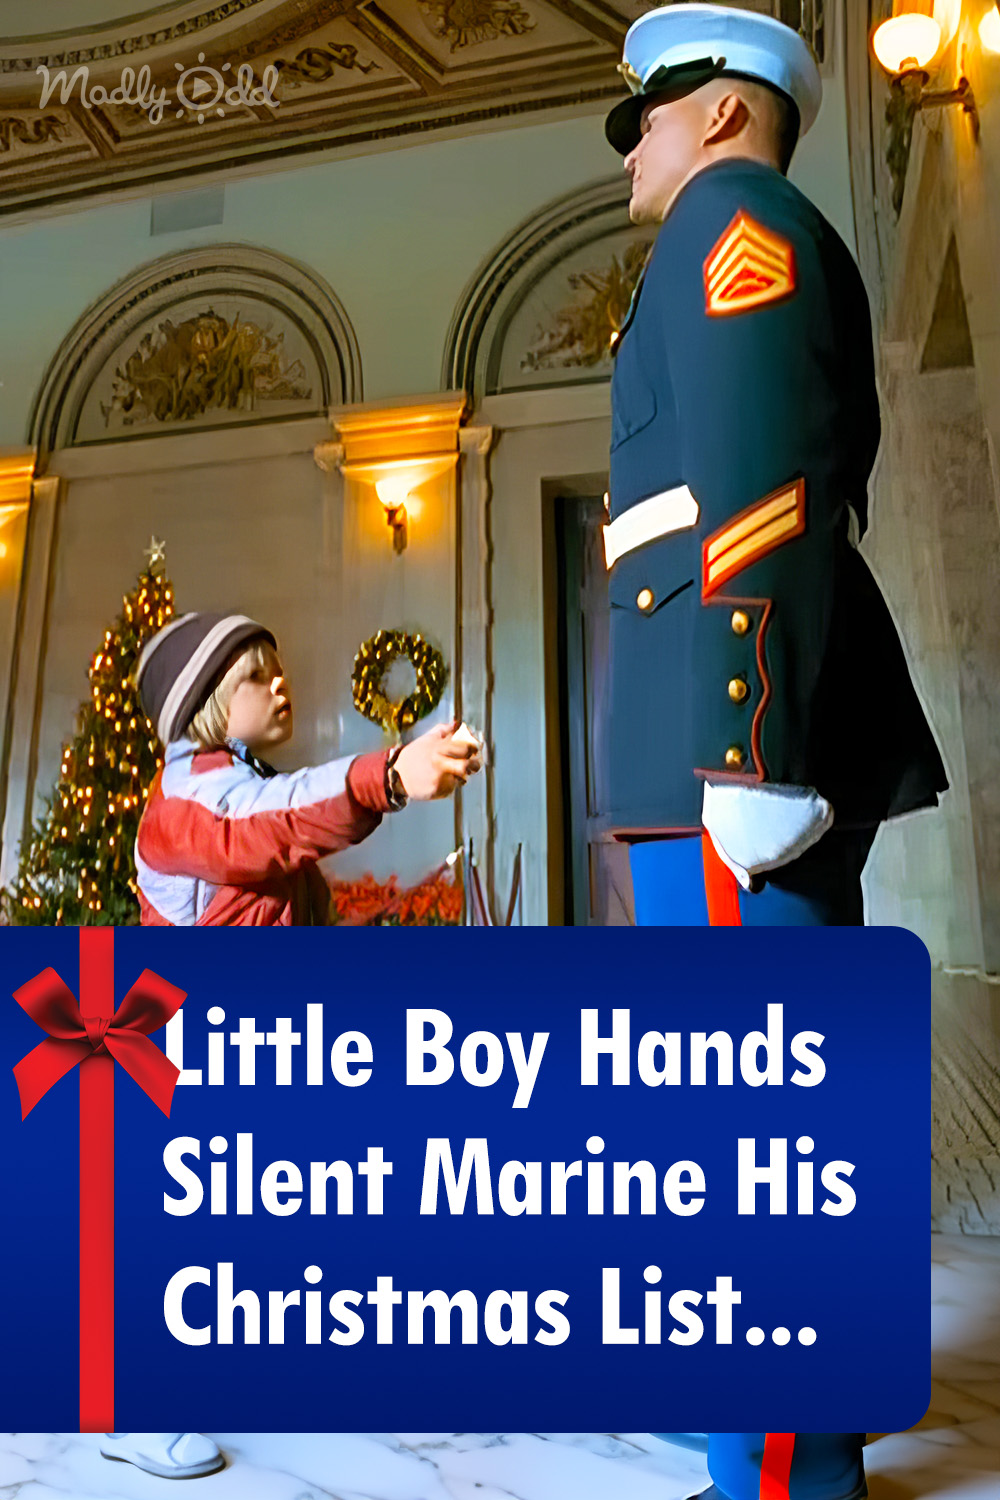 Little Boy Hands Silent Marine His Christmas List. Now Pay Attention to That Marine\'s Left Hand